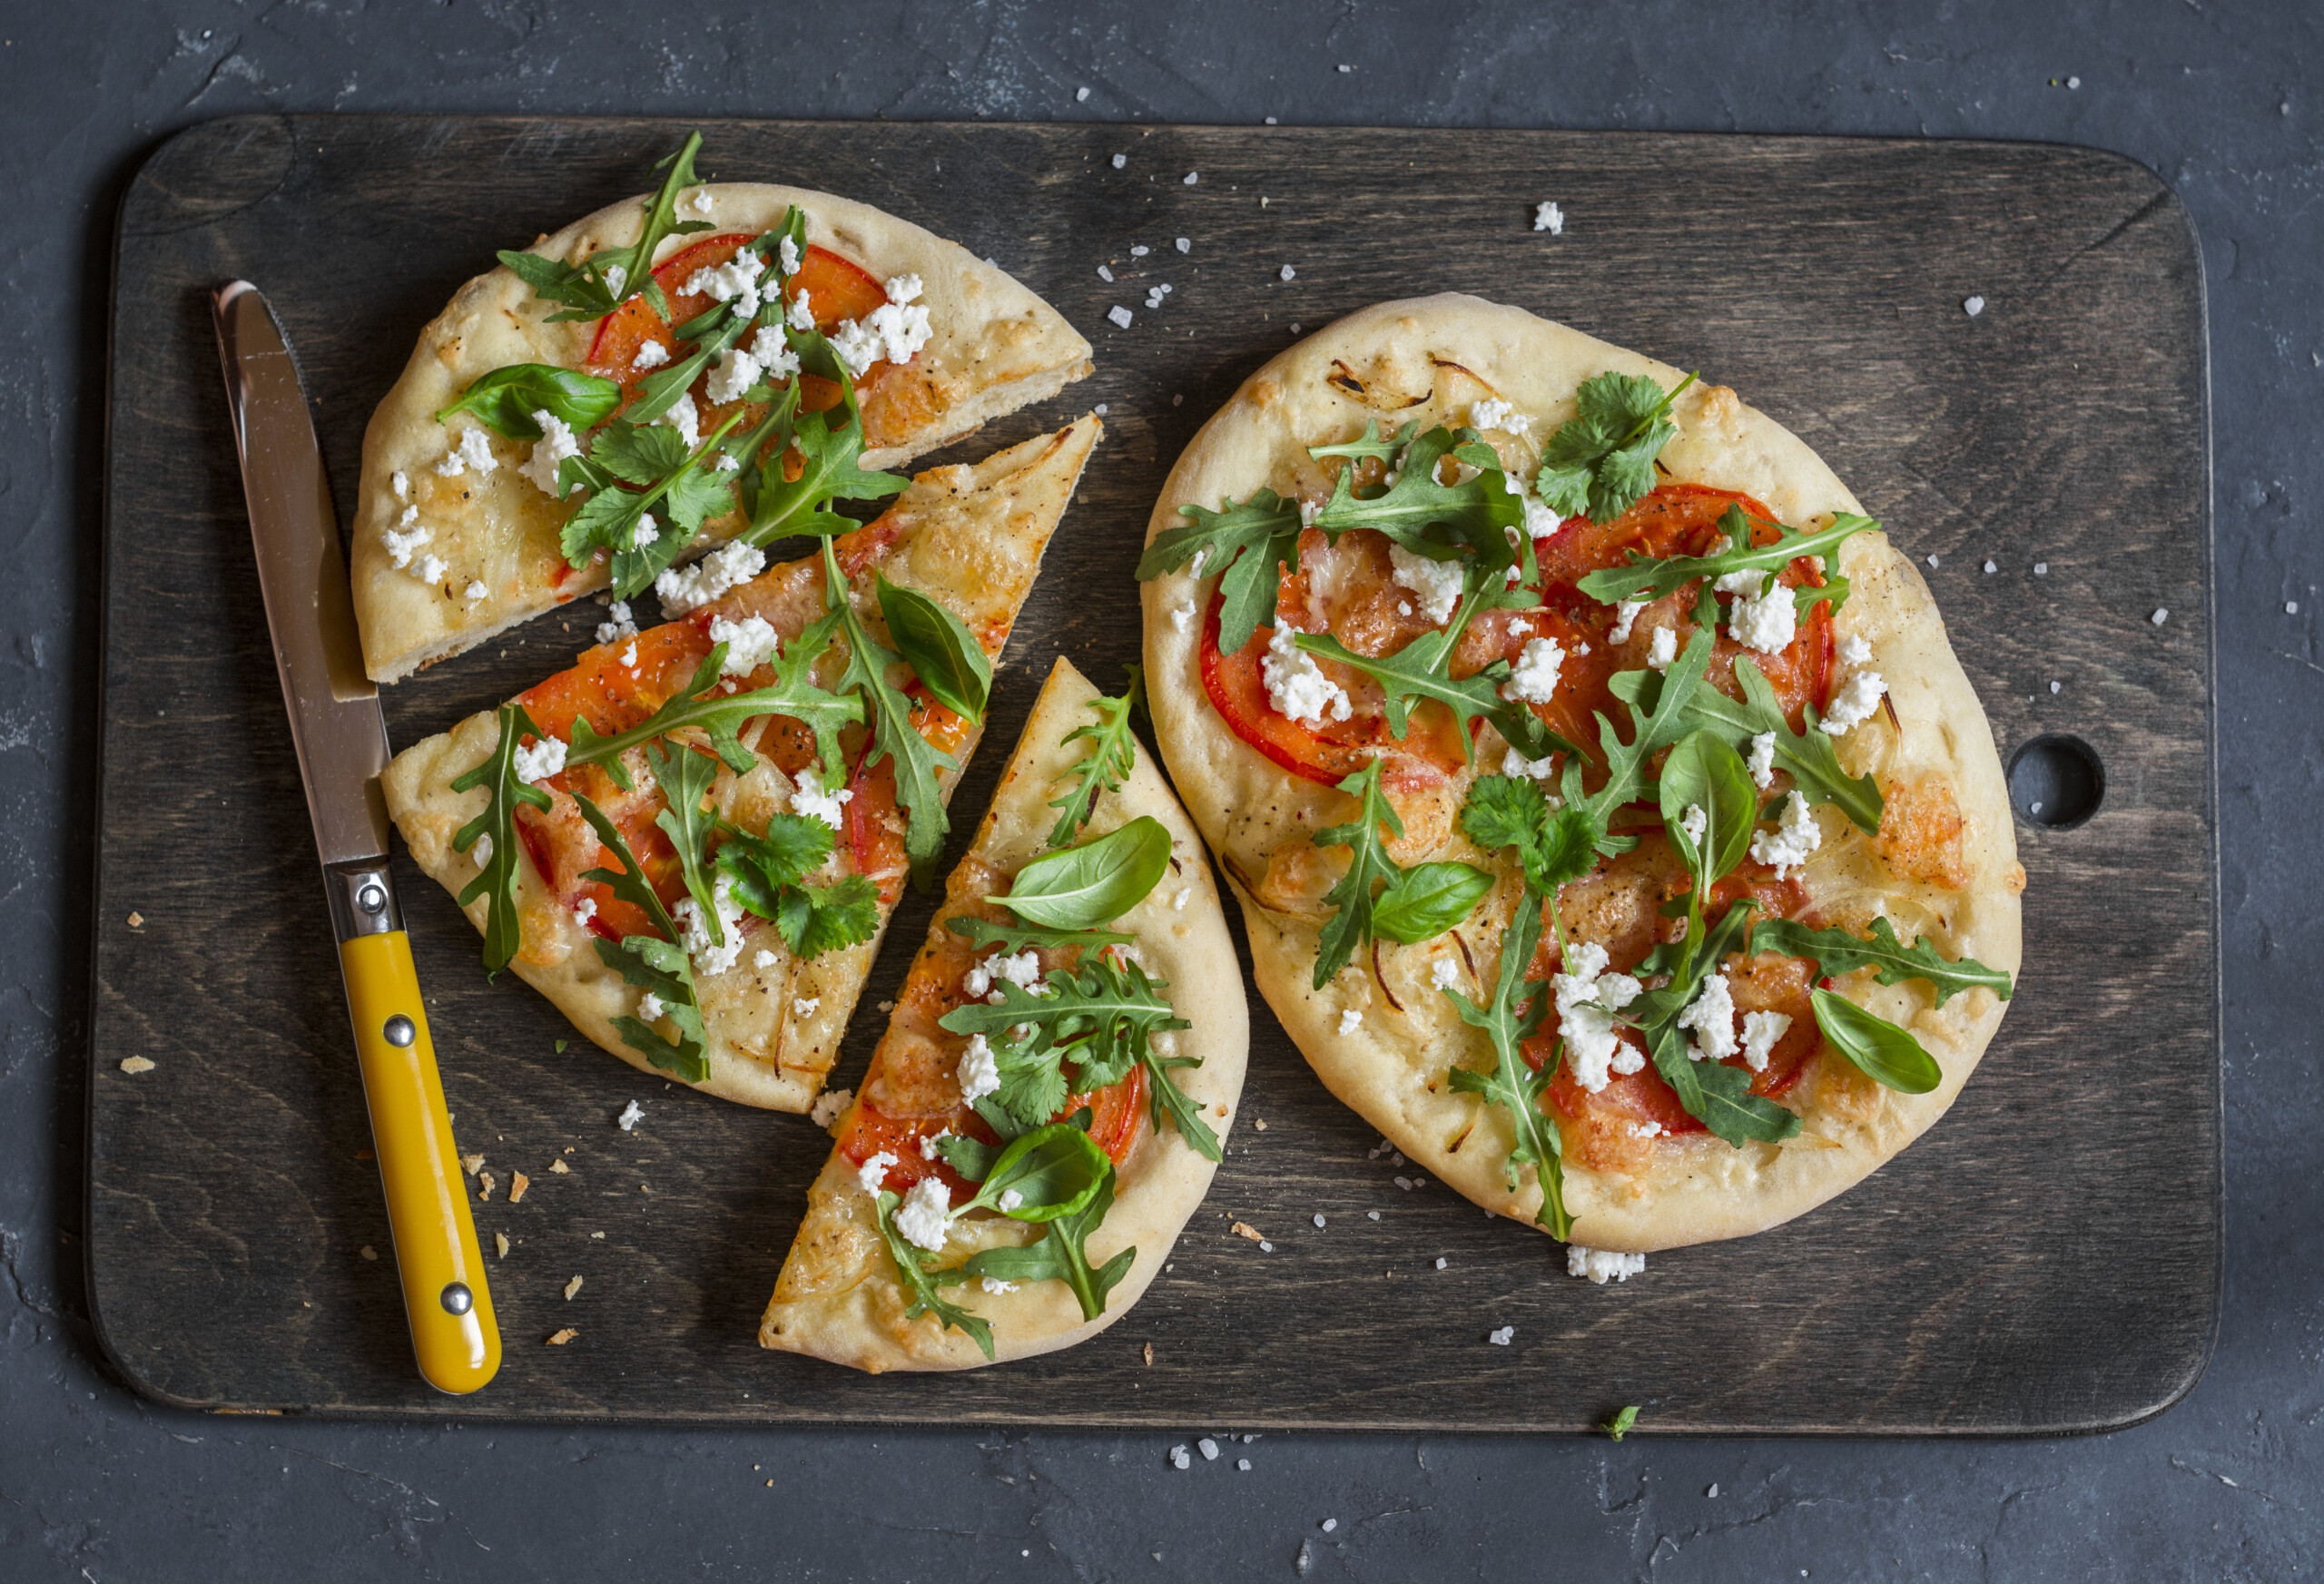 Naan pizza with goat cheese, sliced tomatoes, and arugula.